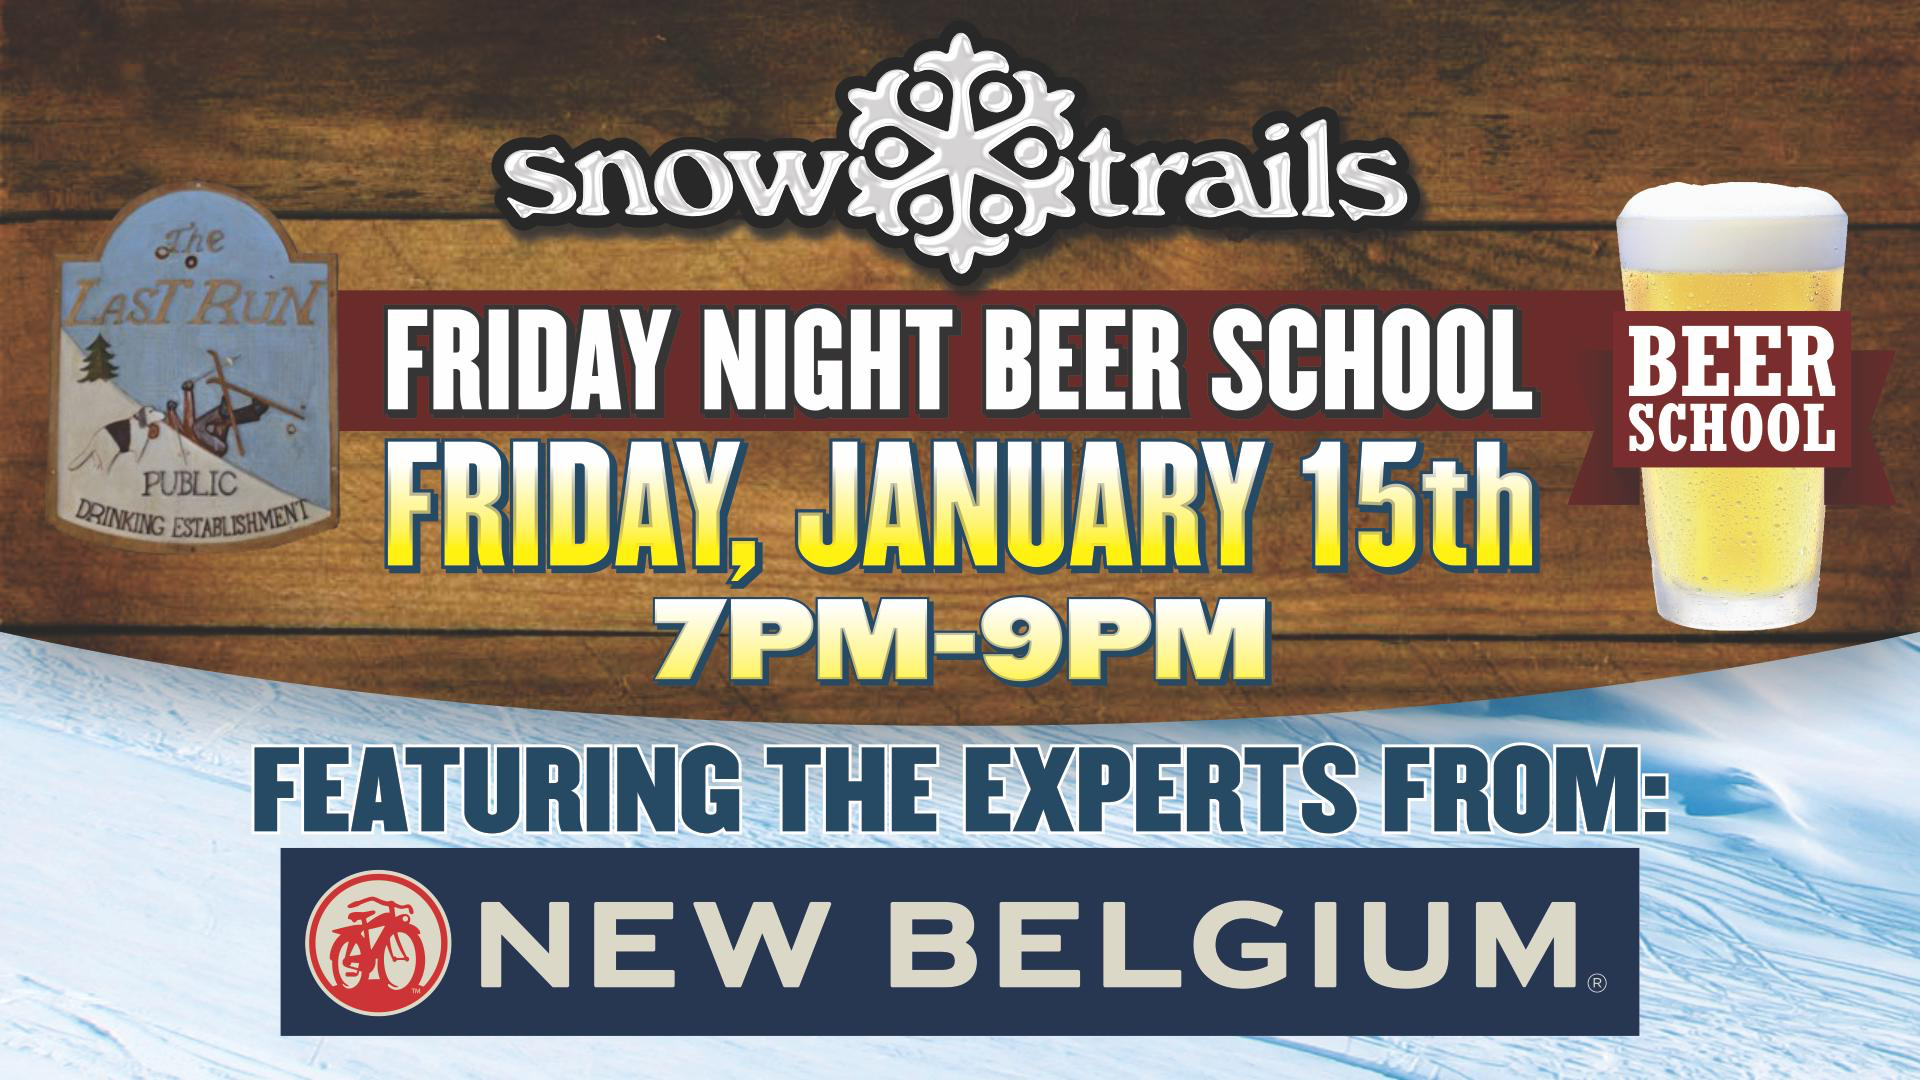 Beer School Featuring New Belgium in The Last Run Bar at Snow Trails